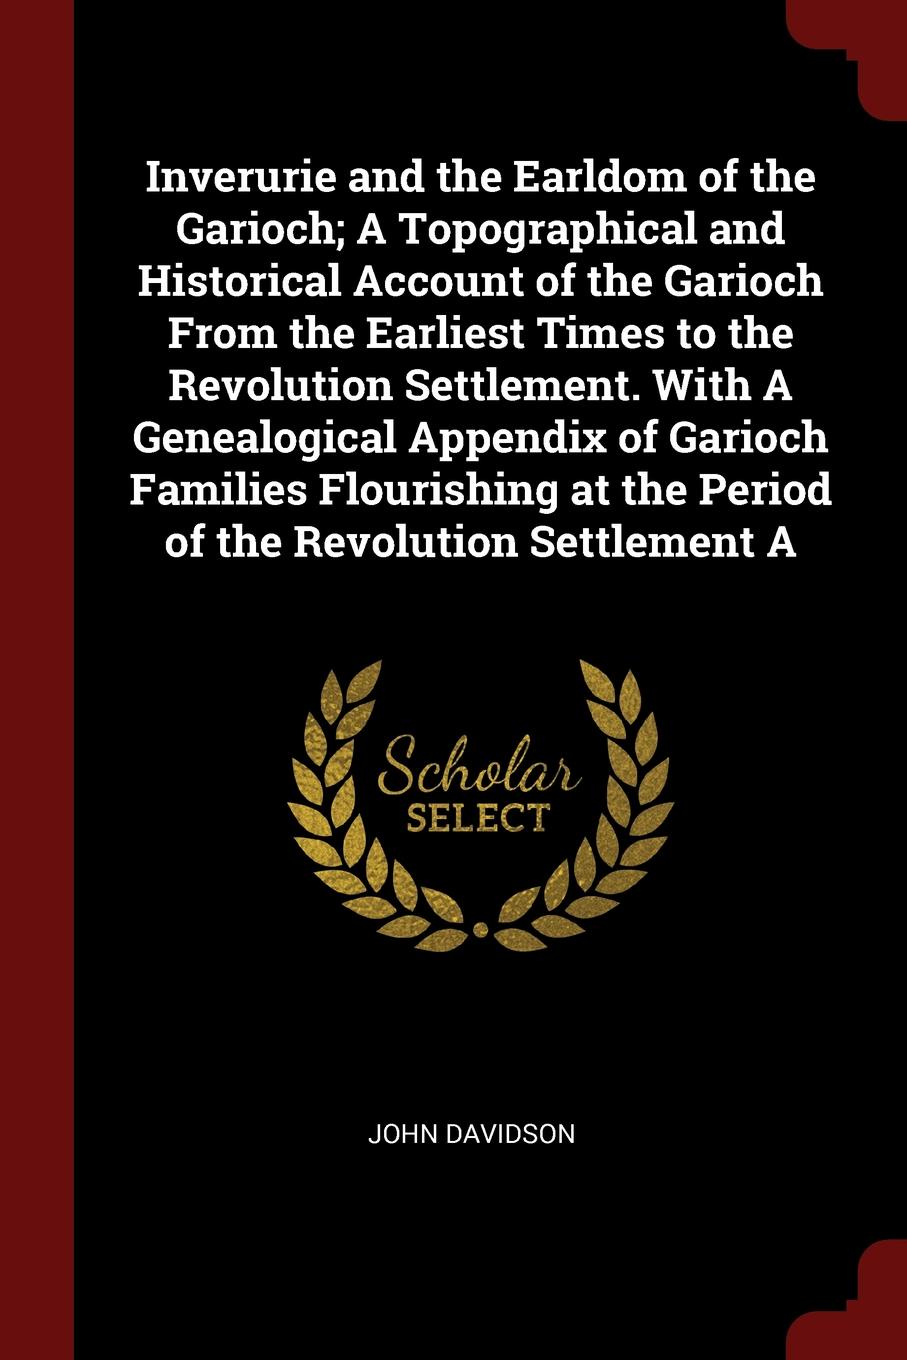 Inverurie and the Earldom of the Garioch; A Topographical and Historical Account of the Garioch From the Earliest Times to the Revolution Settlement. With A Genealogical Appendix of Garioch Families Flourishing at the Period of the Revolution Sett...